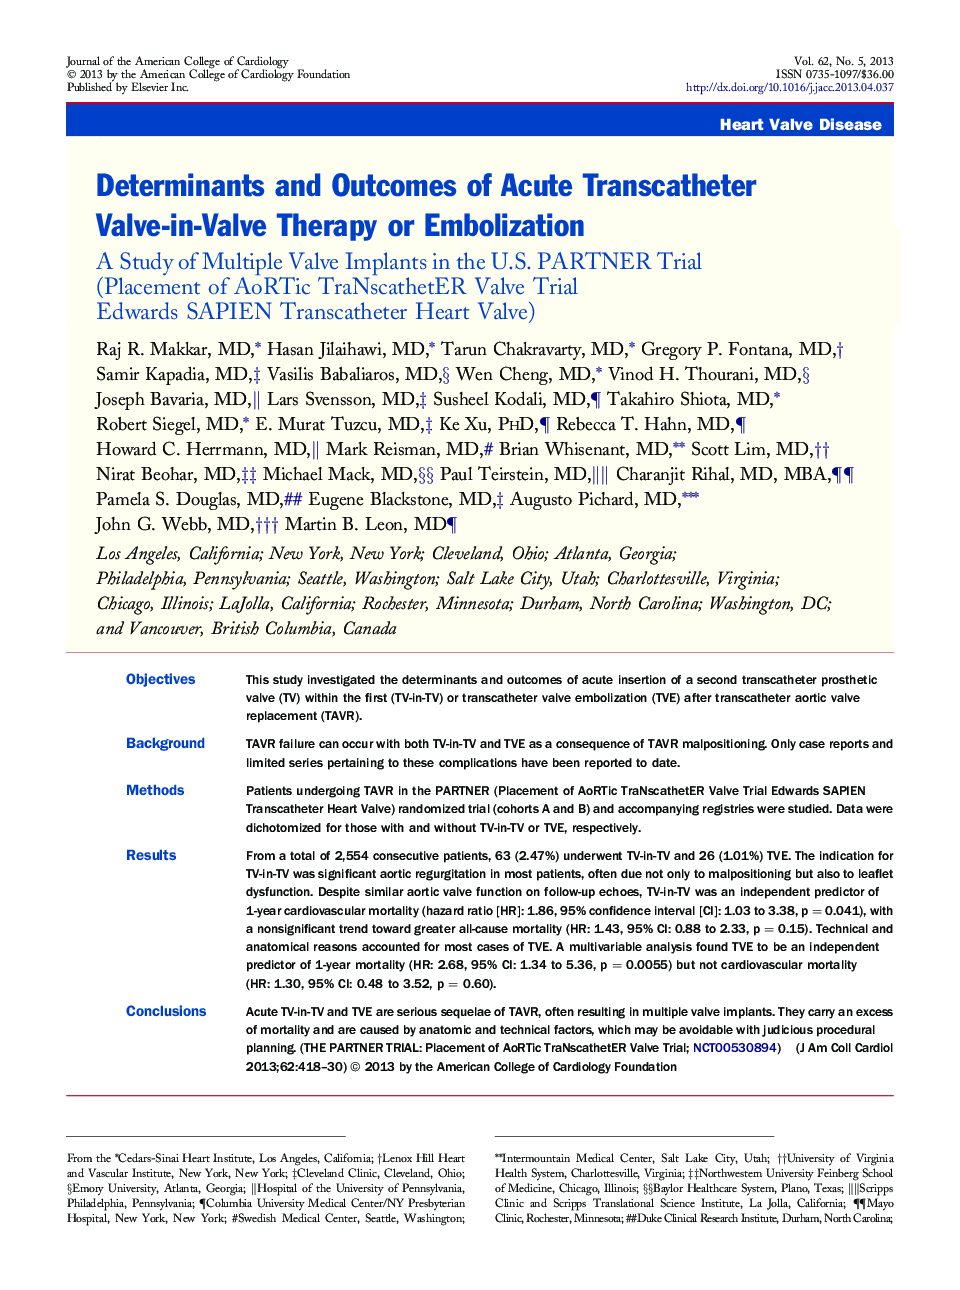 Determinants and Outcomes of Acute Transcatheter Valve-in-Valve Therapy or Embolization : A Study of Multiple Valve Implants in the U.S. PARTNER Trial (Placement of AoRTic TraNscathetER Valve Trial Edwards SAPIEN Transcatheter Heart Valve)